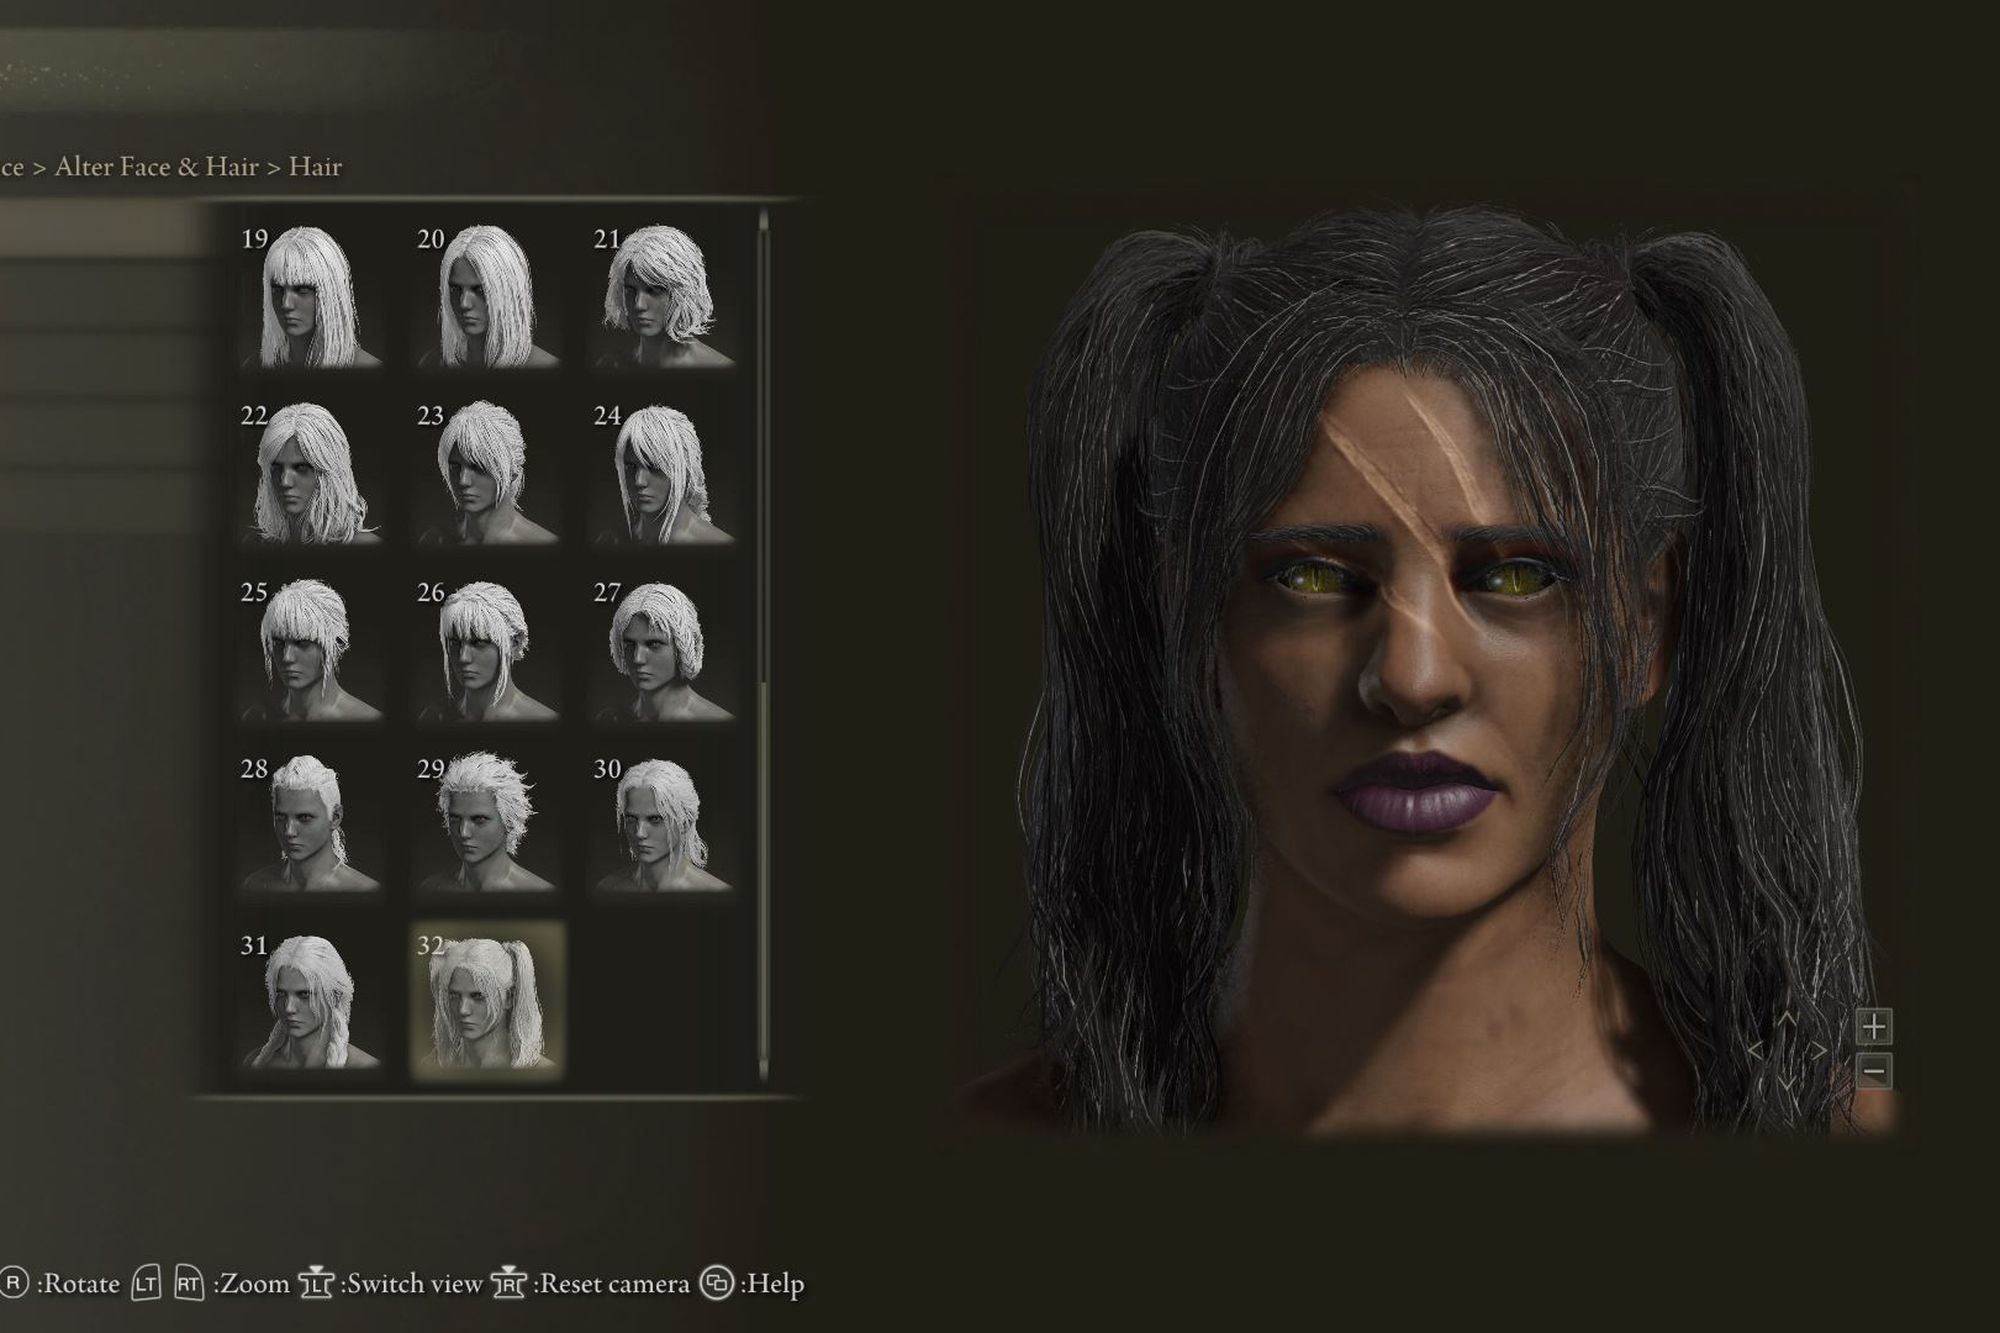 Elden Ring adds new hairstyles, still forgets the Black ones - The Verge